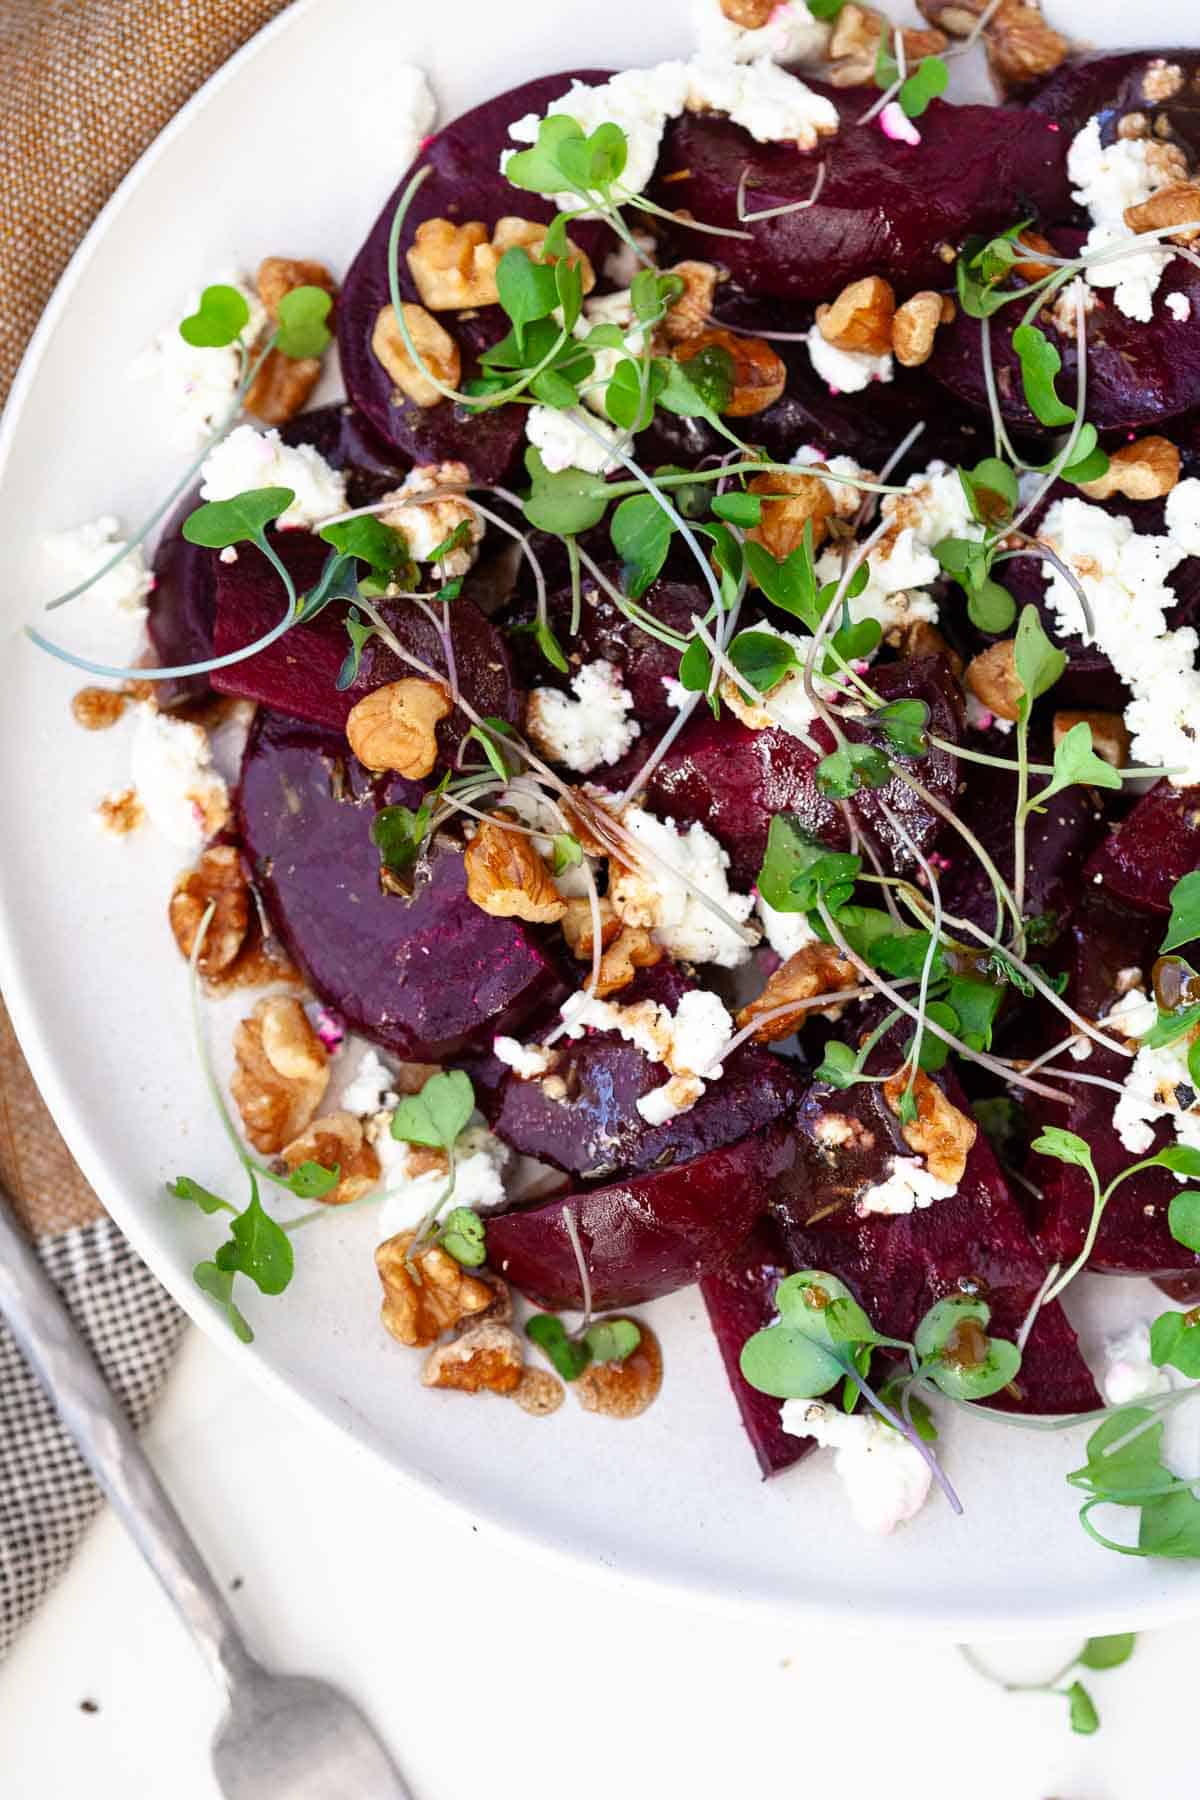 beet salad with feta cheese on a white plate with roasted beets, crumbled feta cheese, toasted walnuts and microgreens